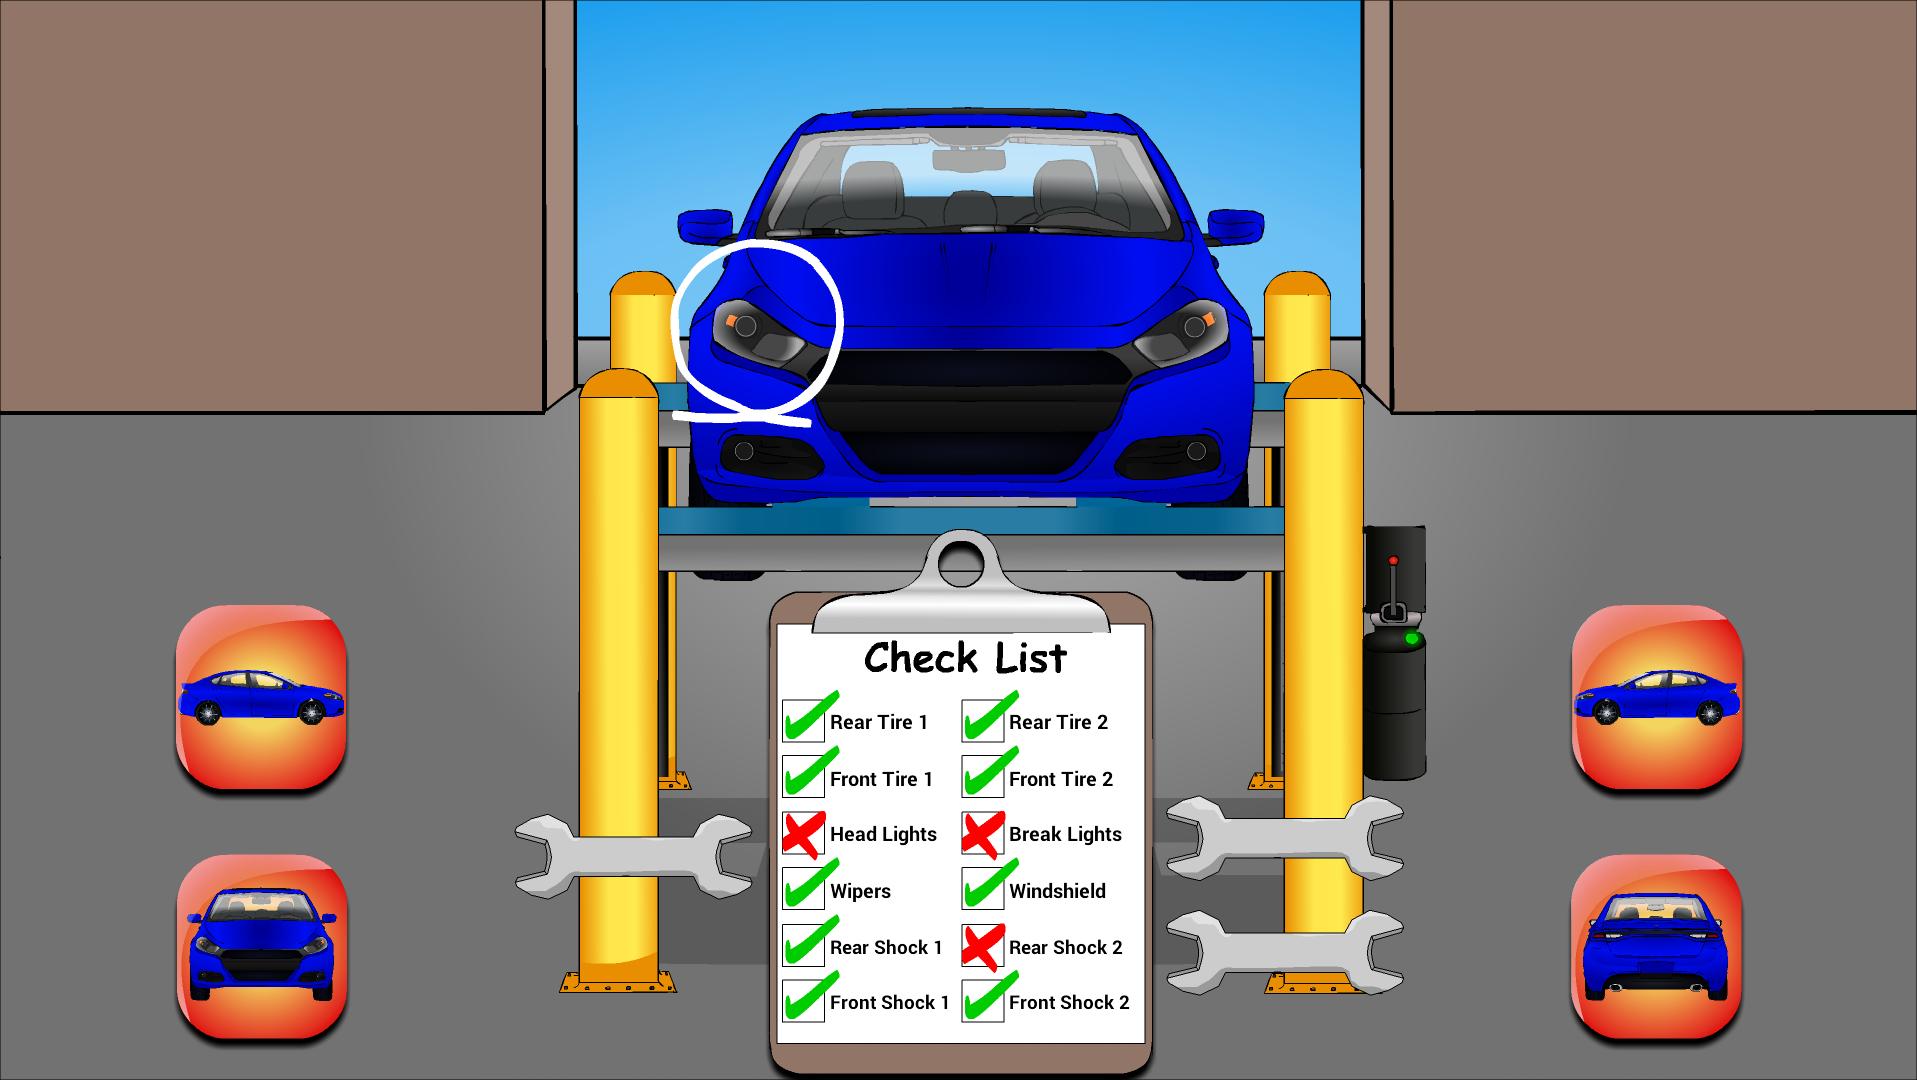 Inspection игра. Inspection car Android app. Car game Inspector. Car Inspection background. My car сайт